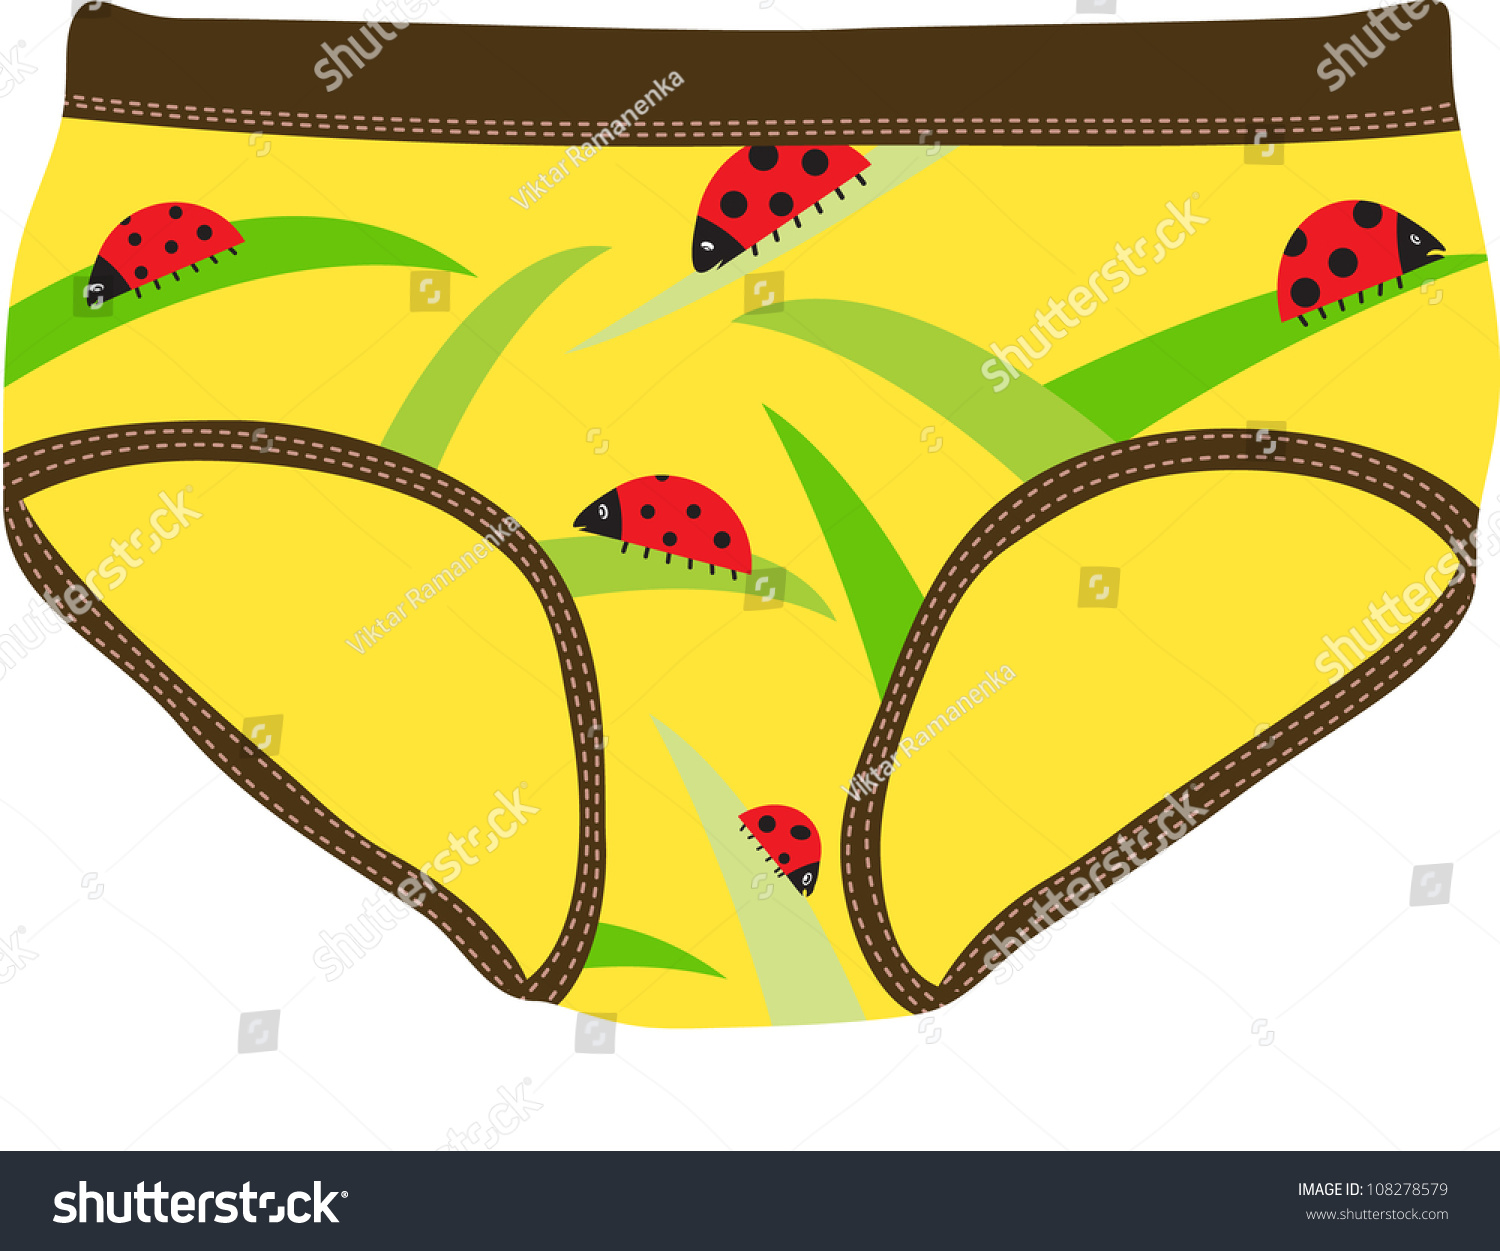 clipart pictures of underwear - photo #38